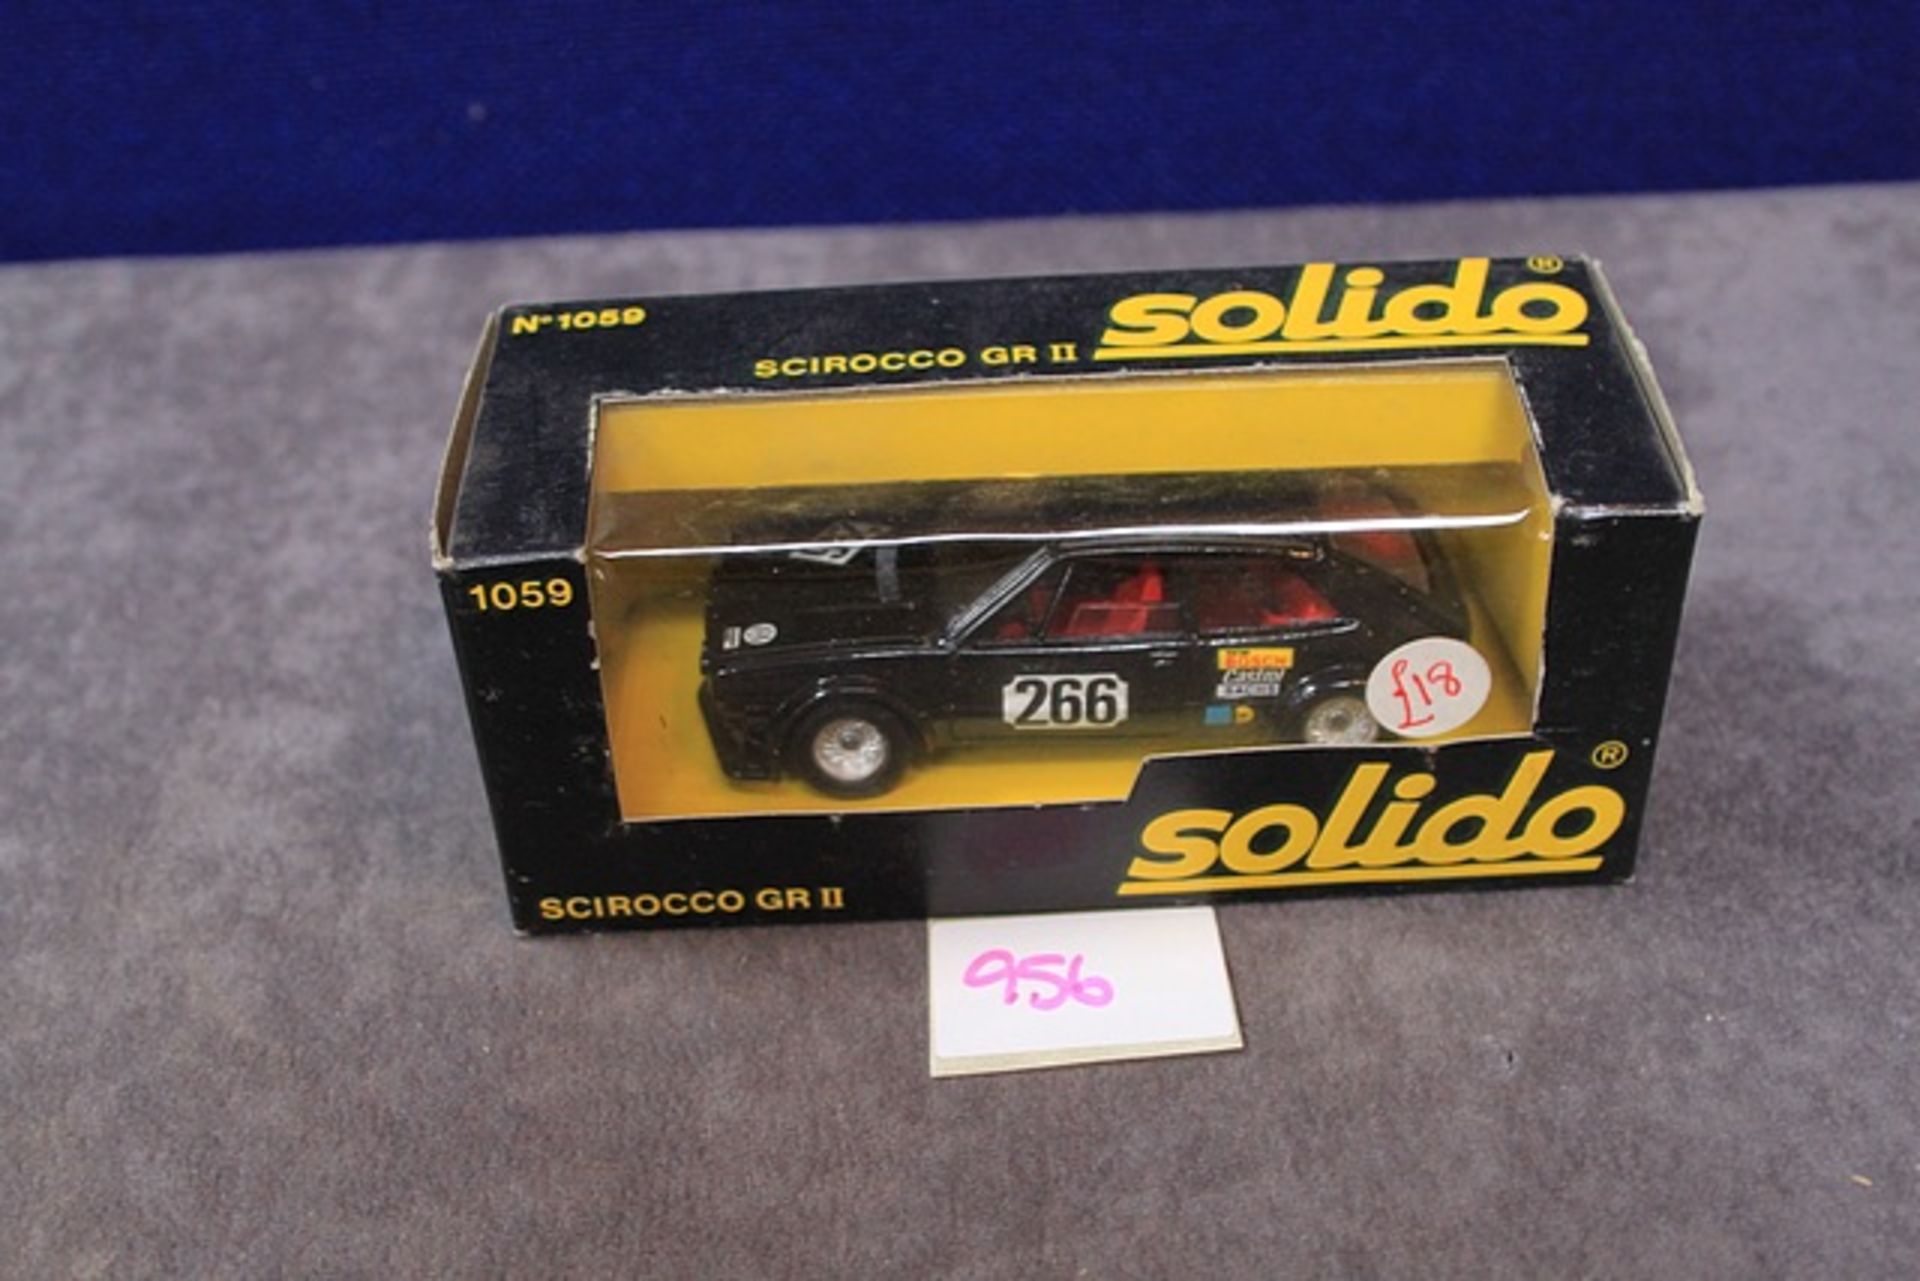 Solido Diecast Models # 1059 Scirocco GR II Rally Car Racing # 266 In Box